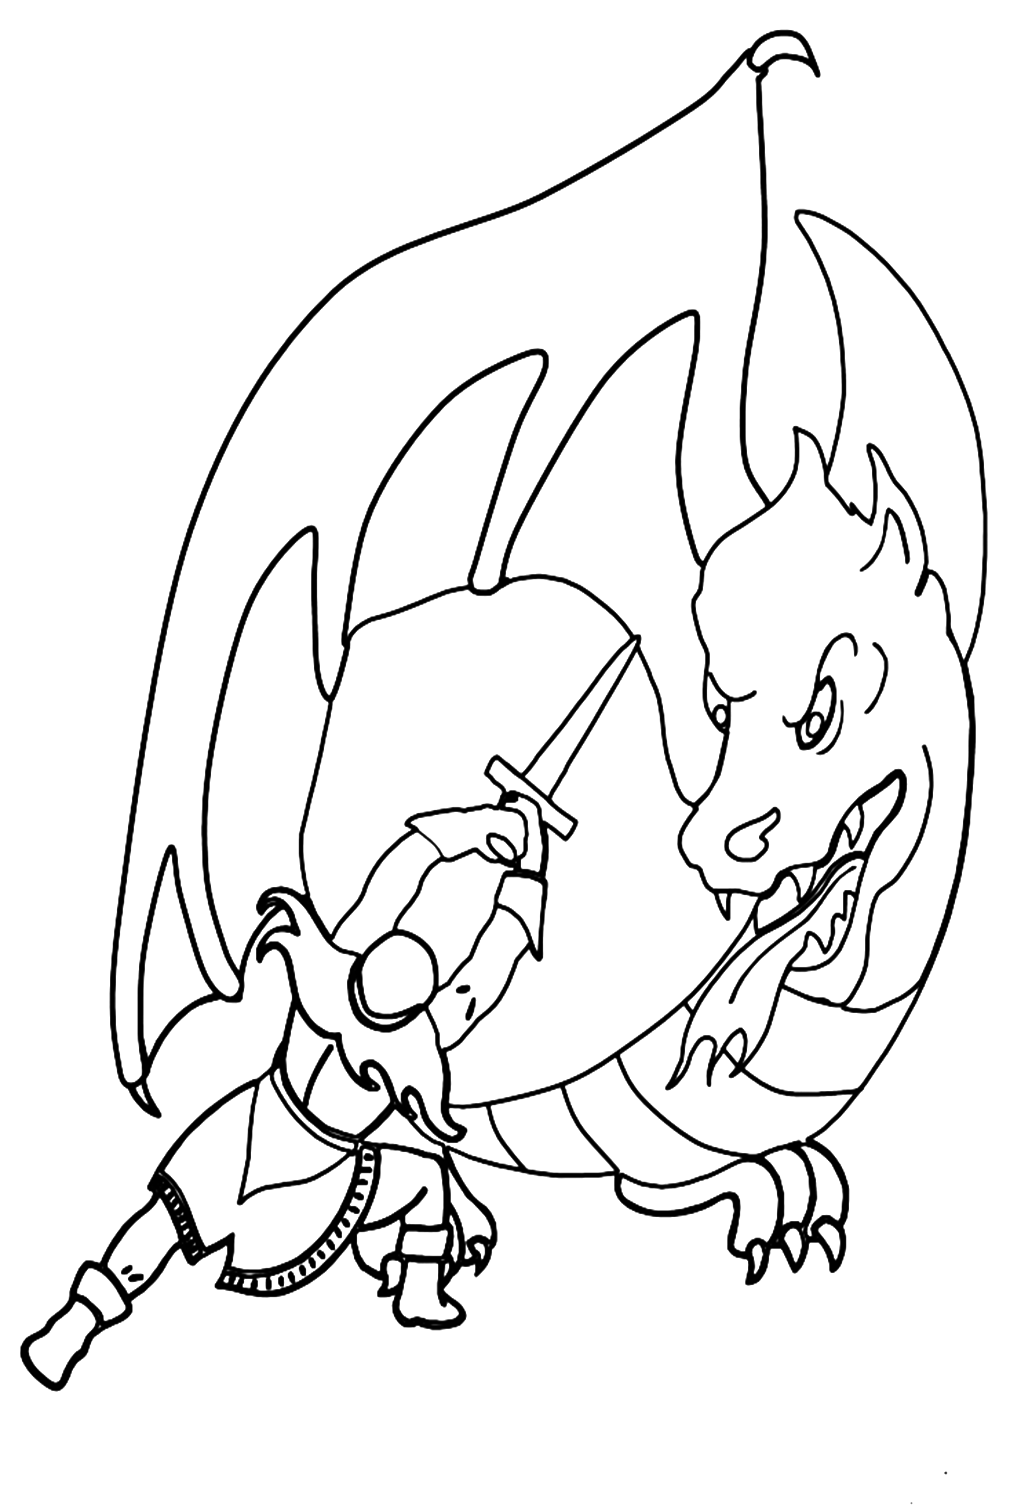 Dragon Battle Picture To Color Coloring Pages